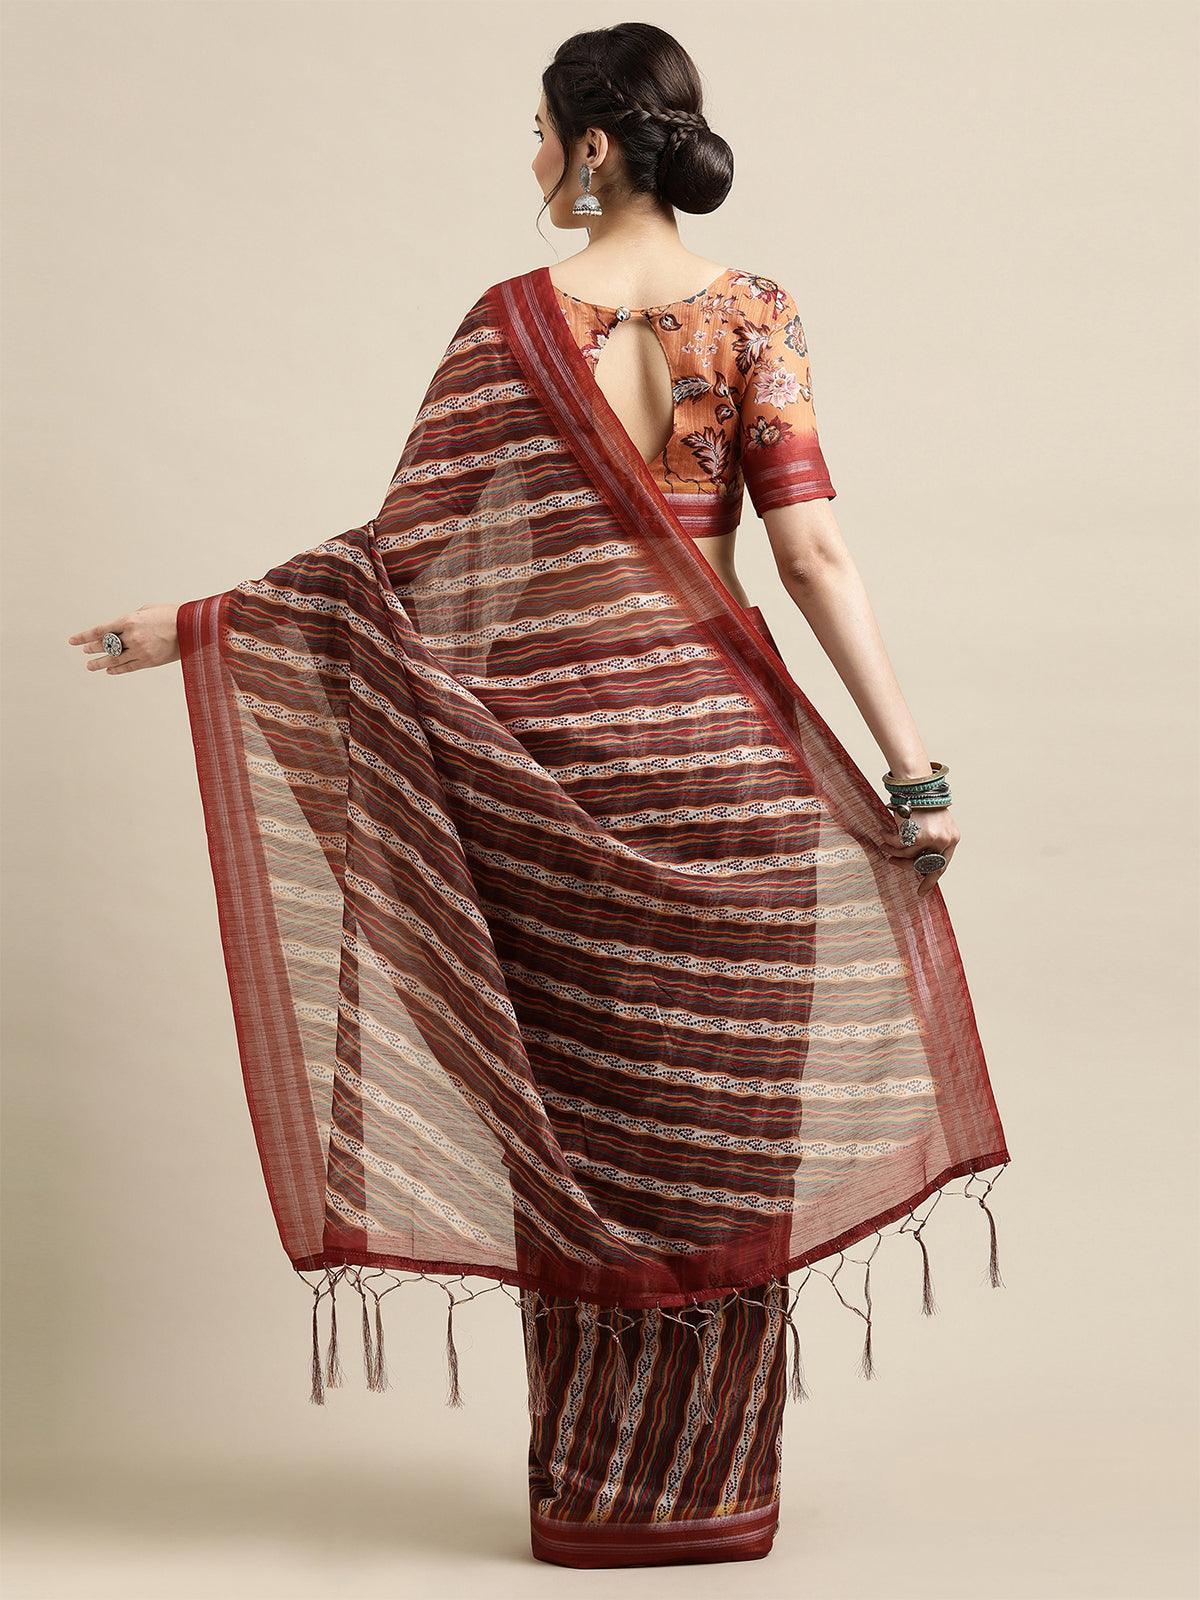 Maroon Festive Linen Blend Printed Saree With Unstitched Blouse - Odette